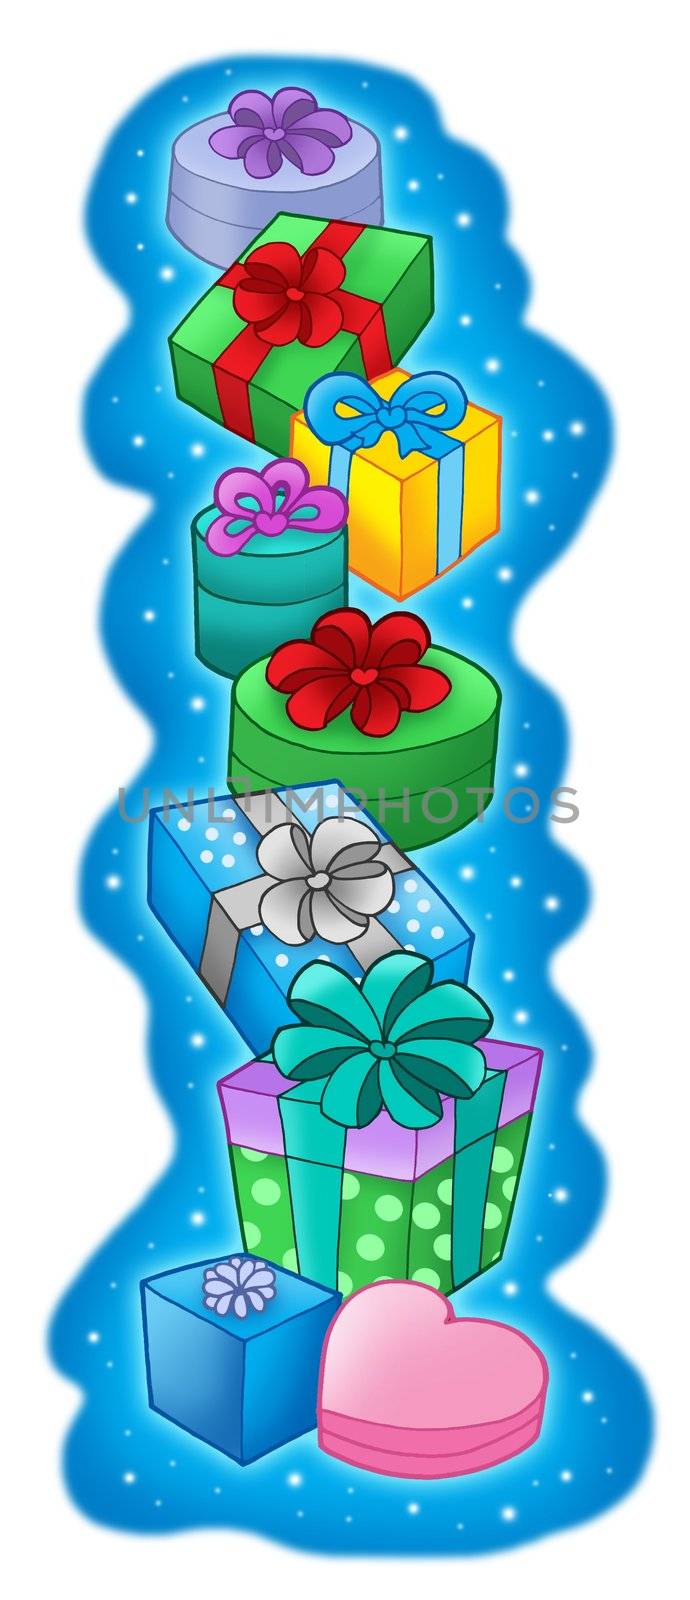 Pile of Christmas gifts on blue background by clairev